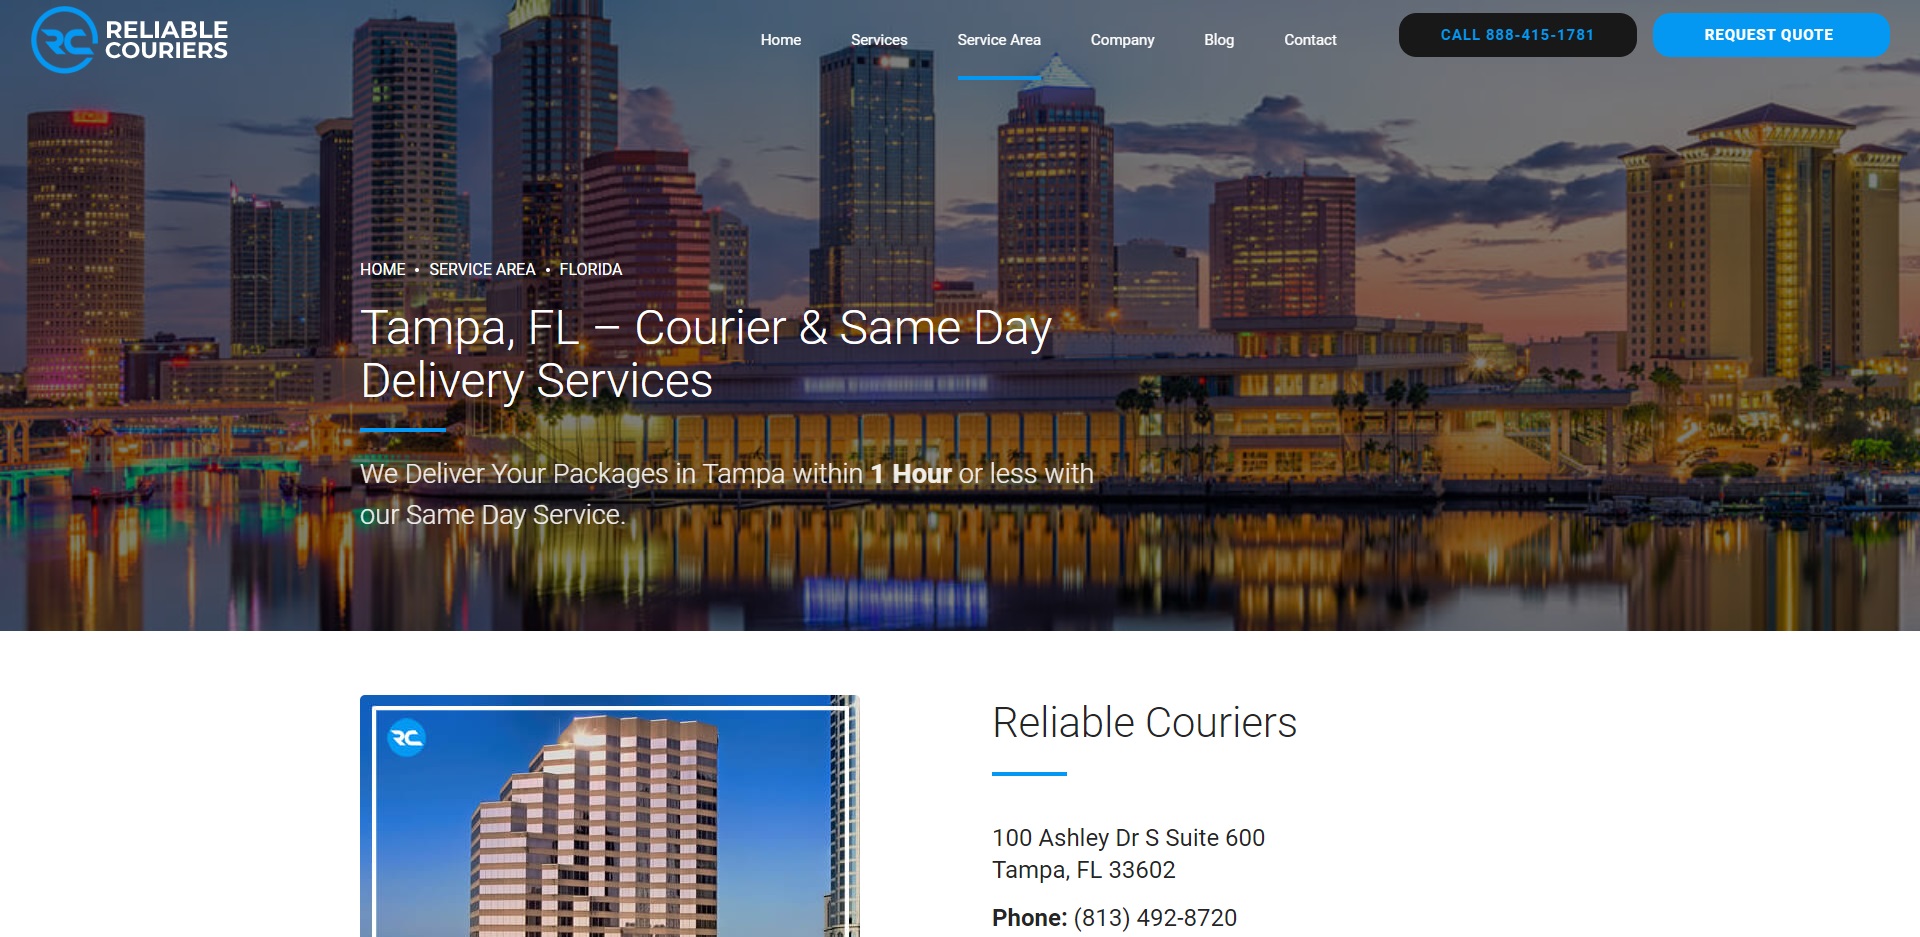 Tampa, FL's Best Couriers